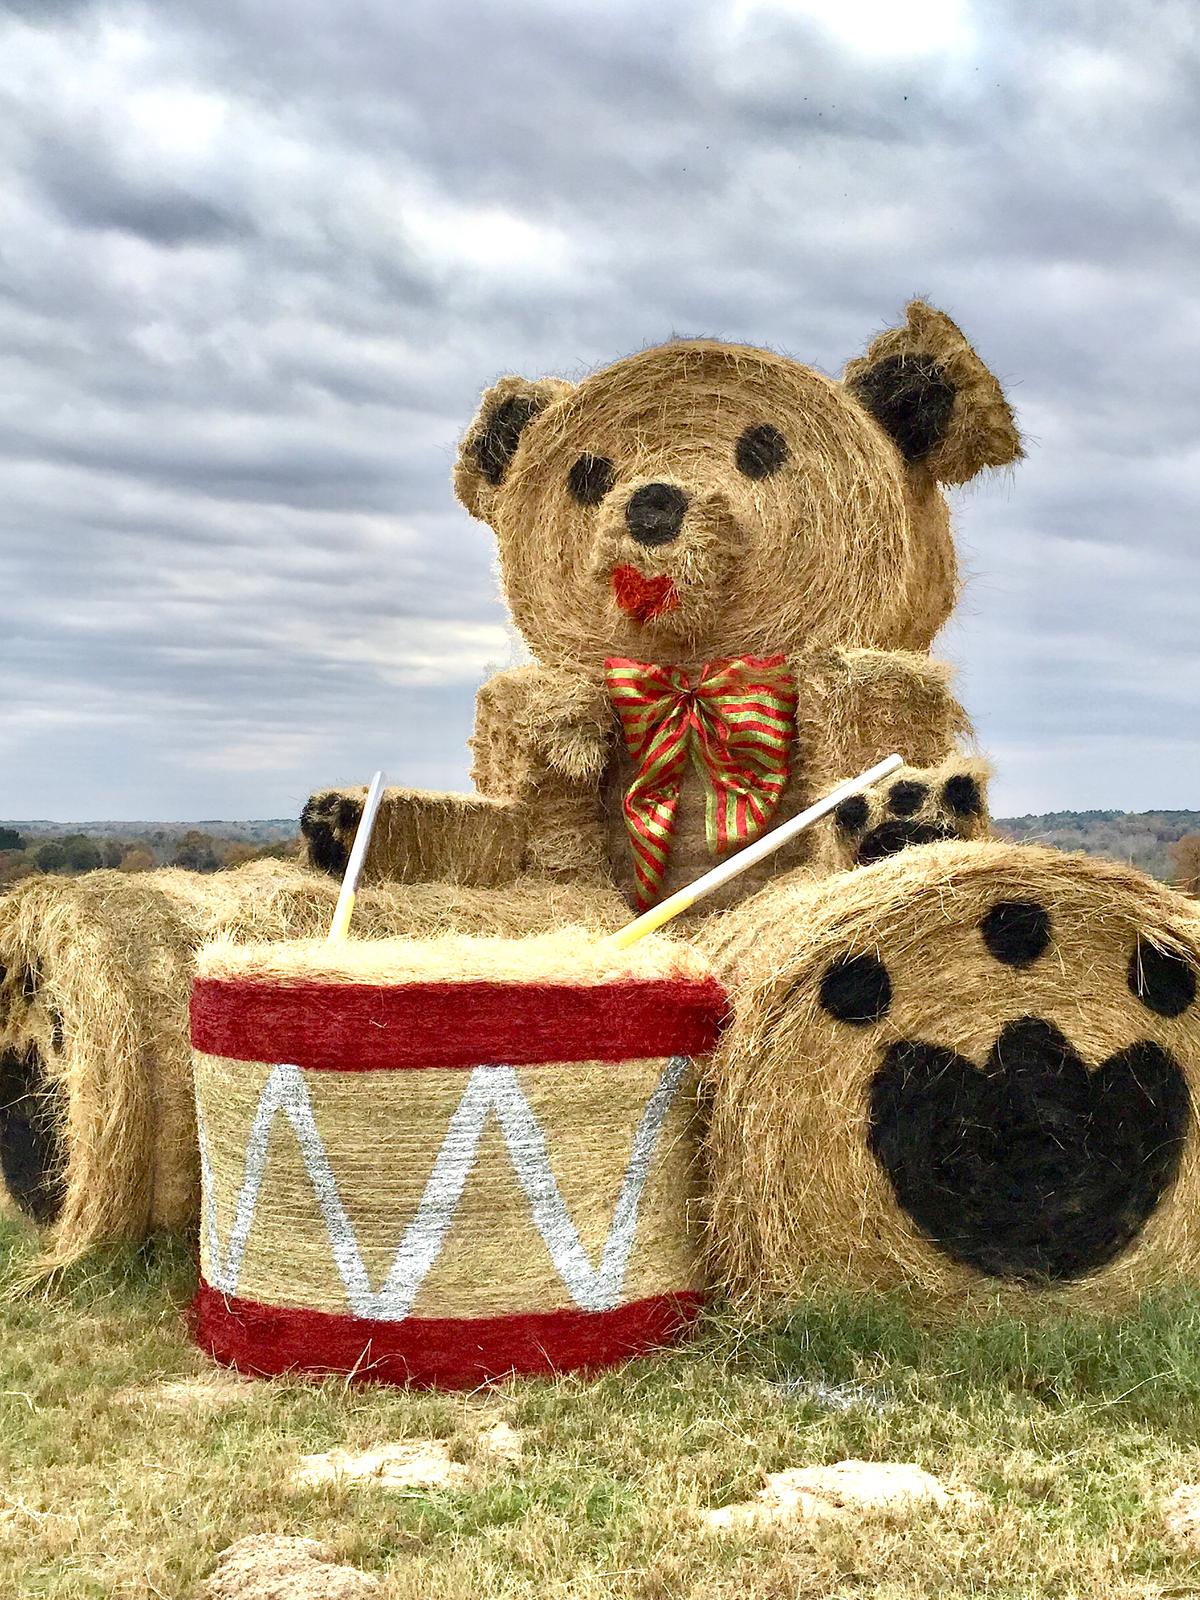 The bear with a drum was the couple's first hay bale sculpture which was created in 2016. (Courtesy of <a href="https://www.facebook.com/groups/320200669469831/">Melissa Kelley</a>)